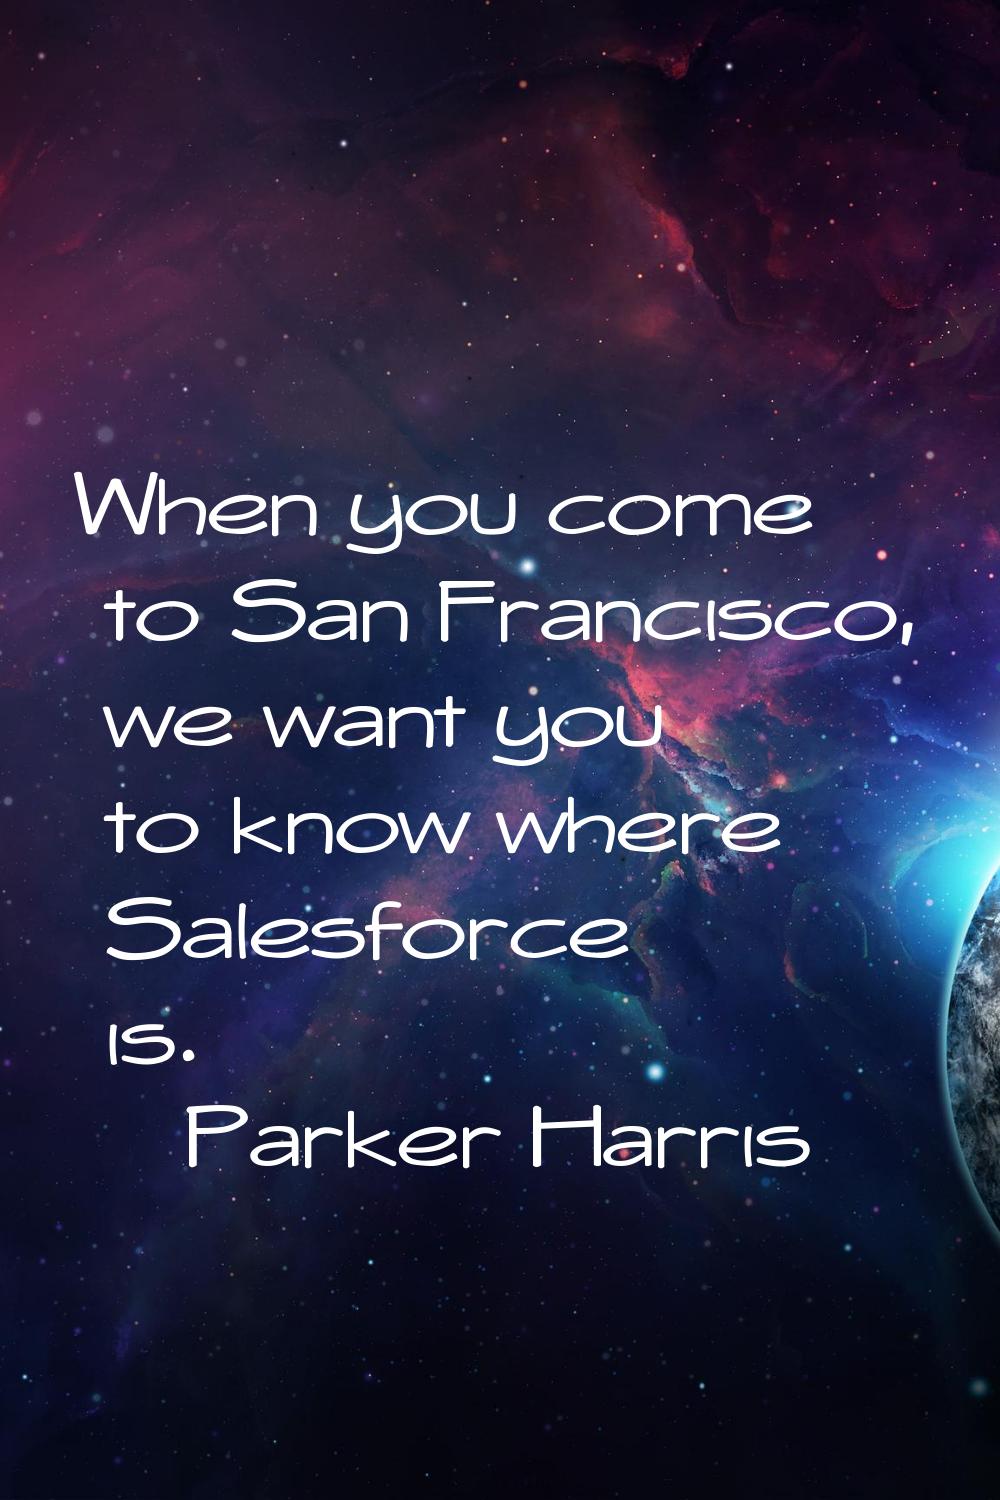 When you come to San Francisco, we want you to know where Salesforce is.